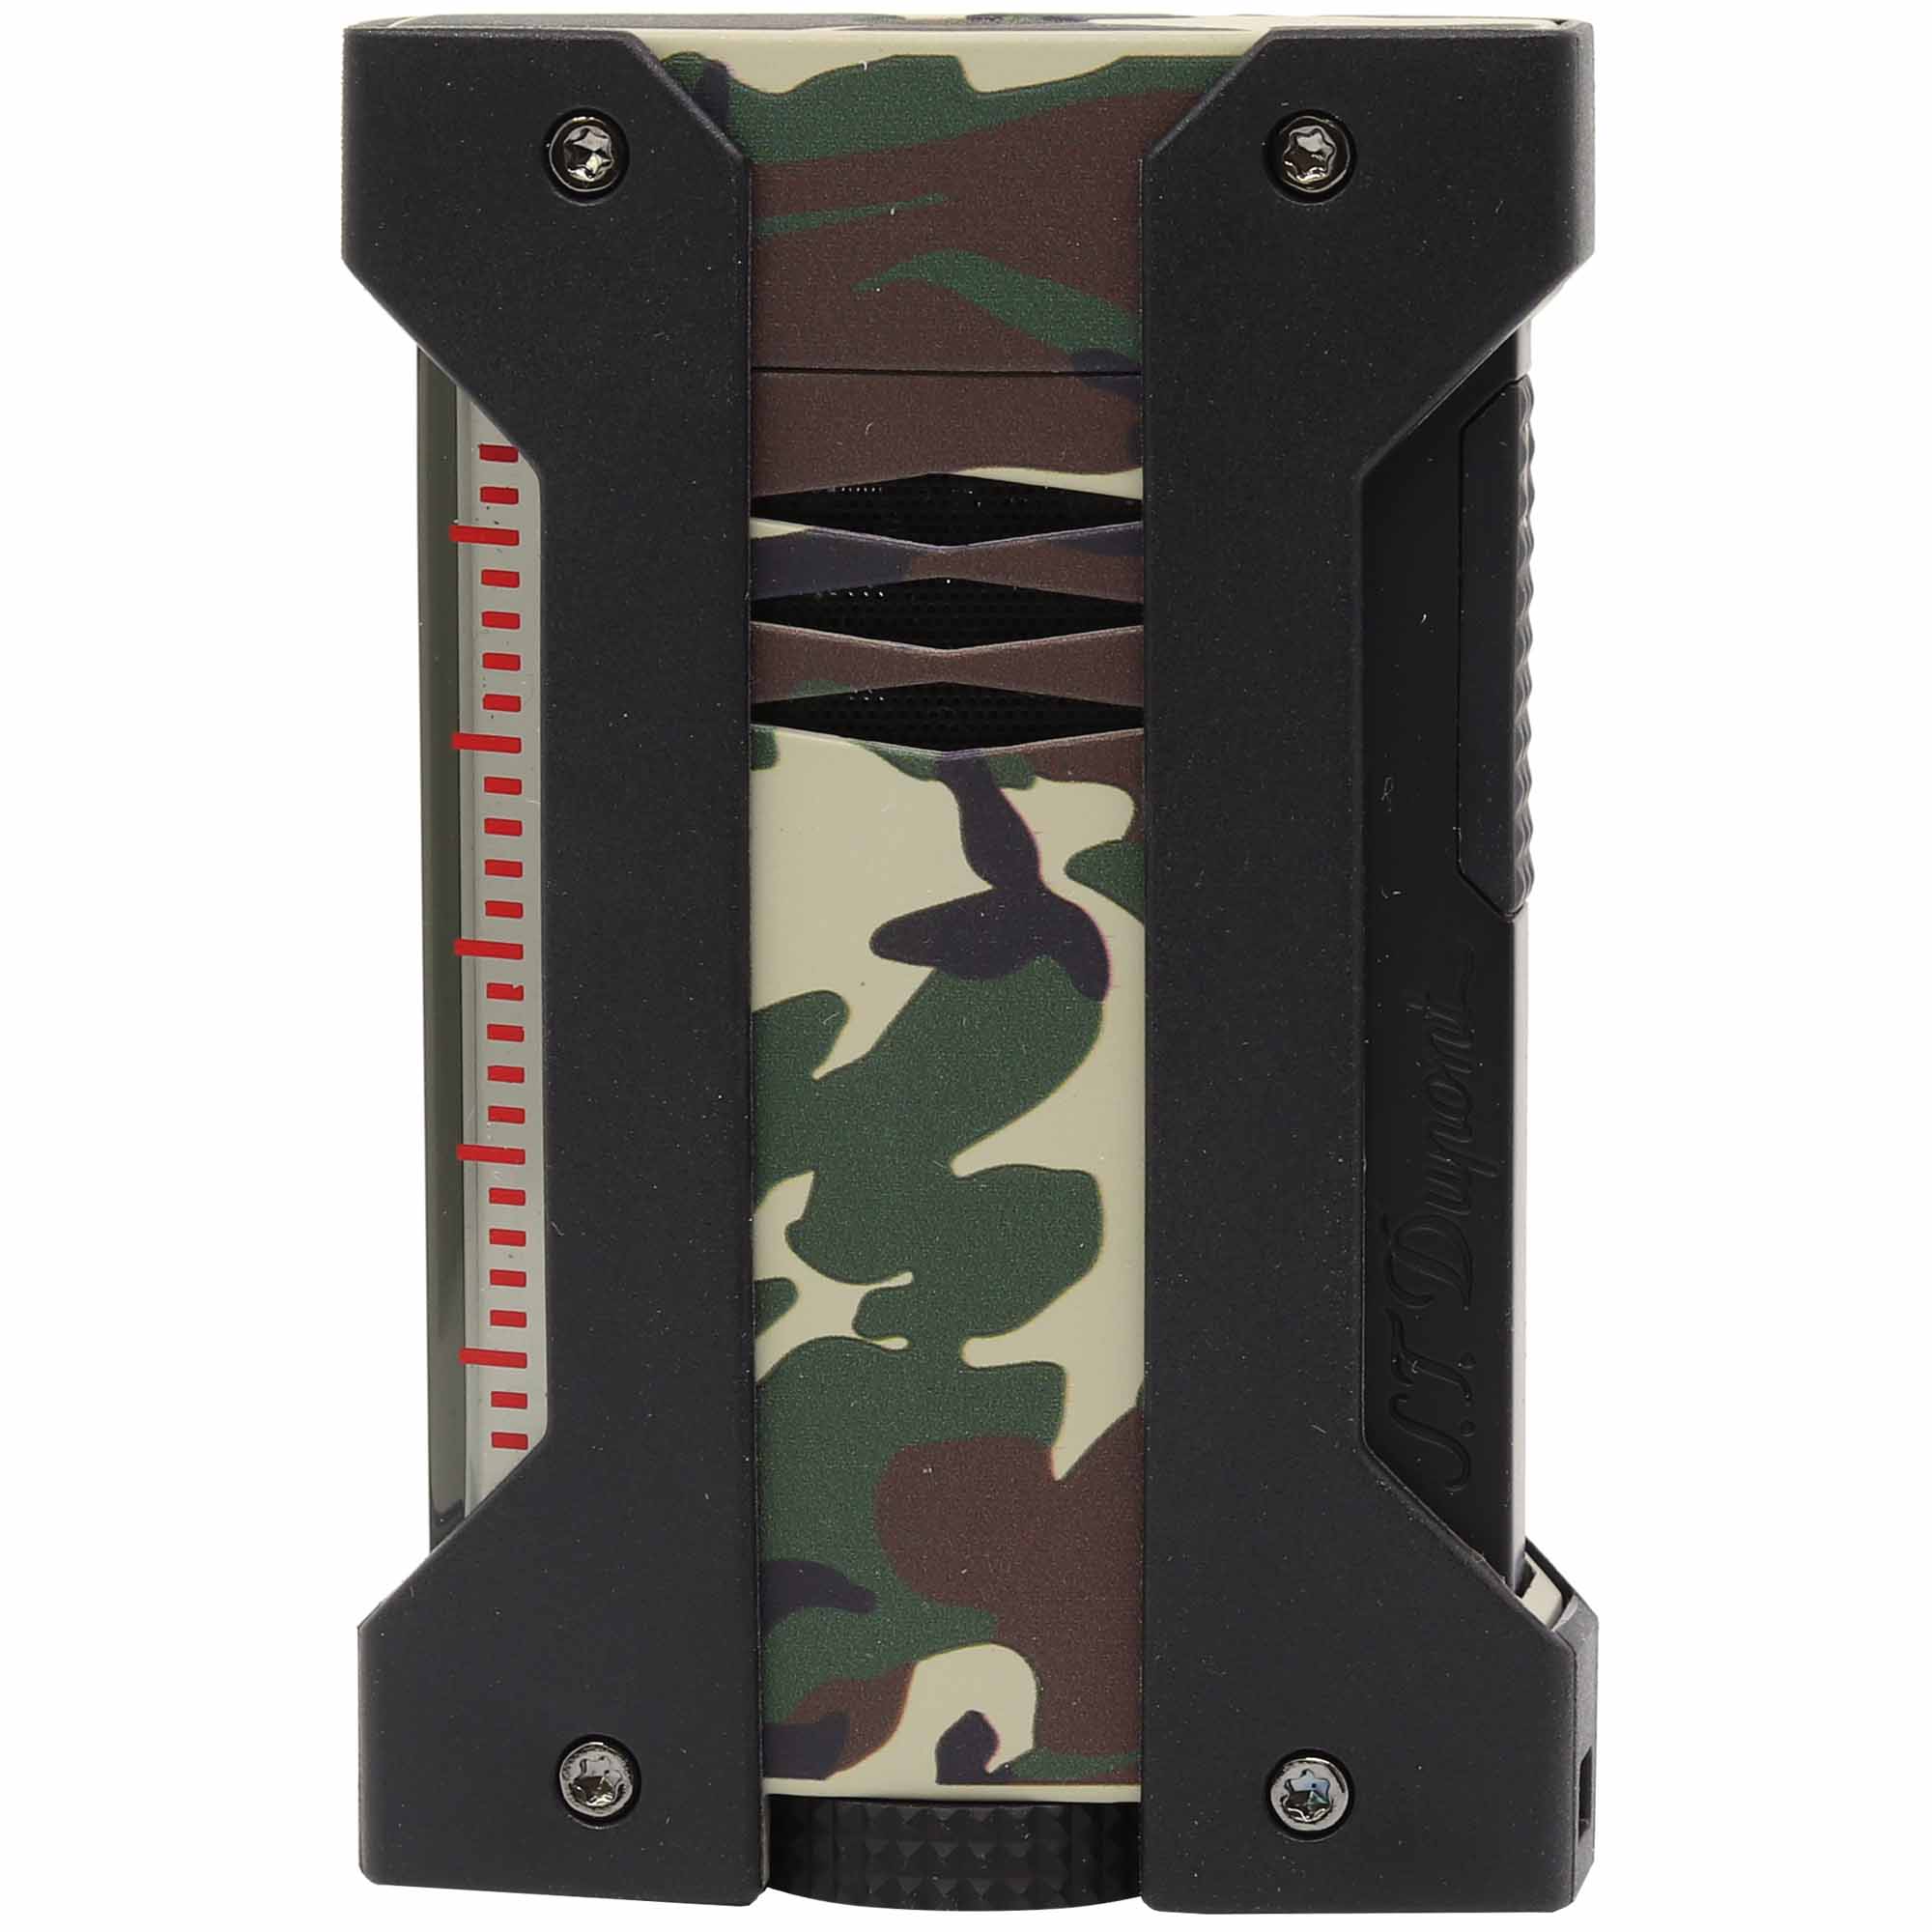 S.T. Dupont Defi Extrem Army Green